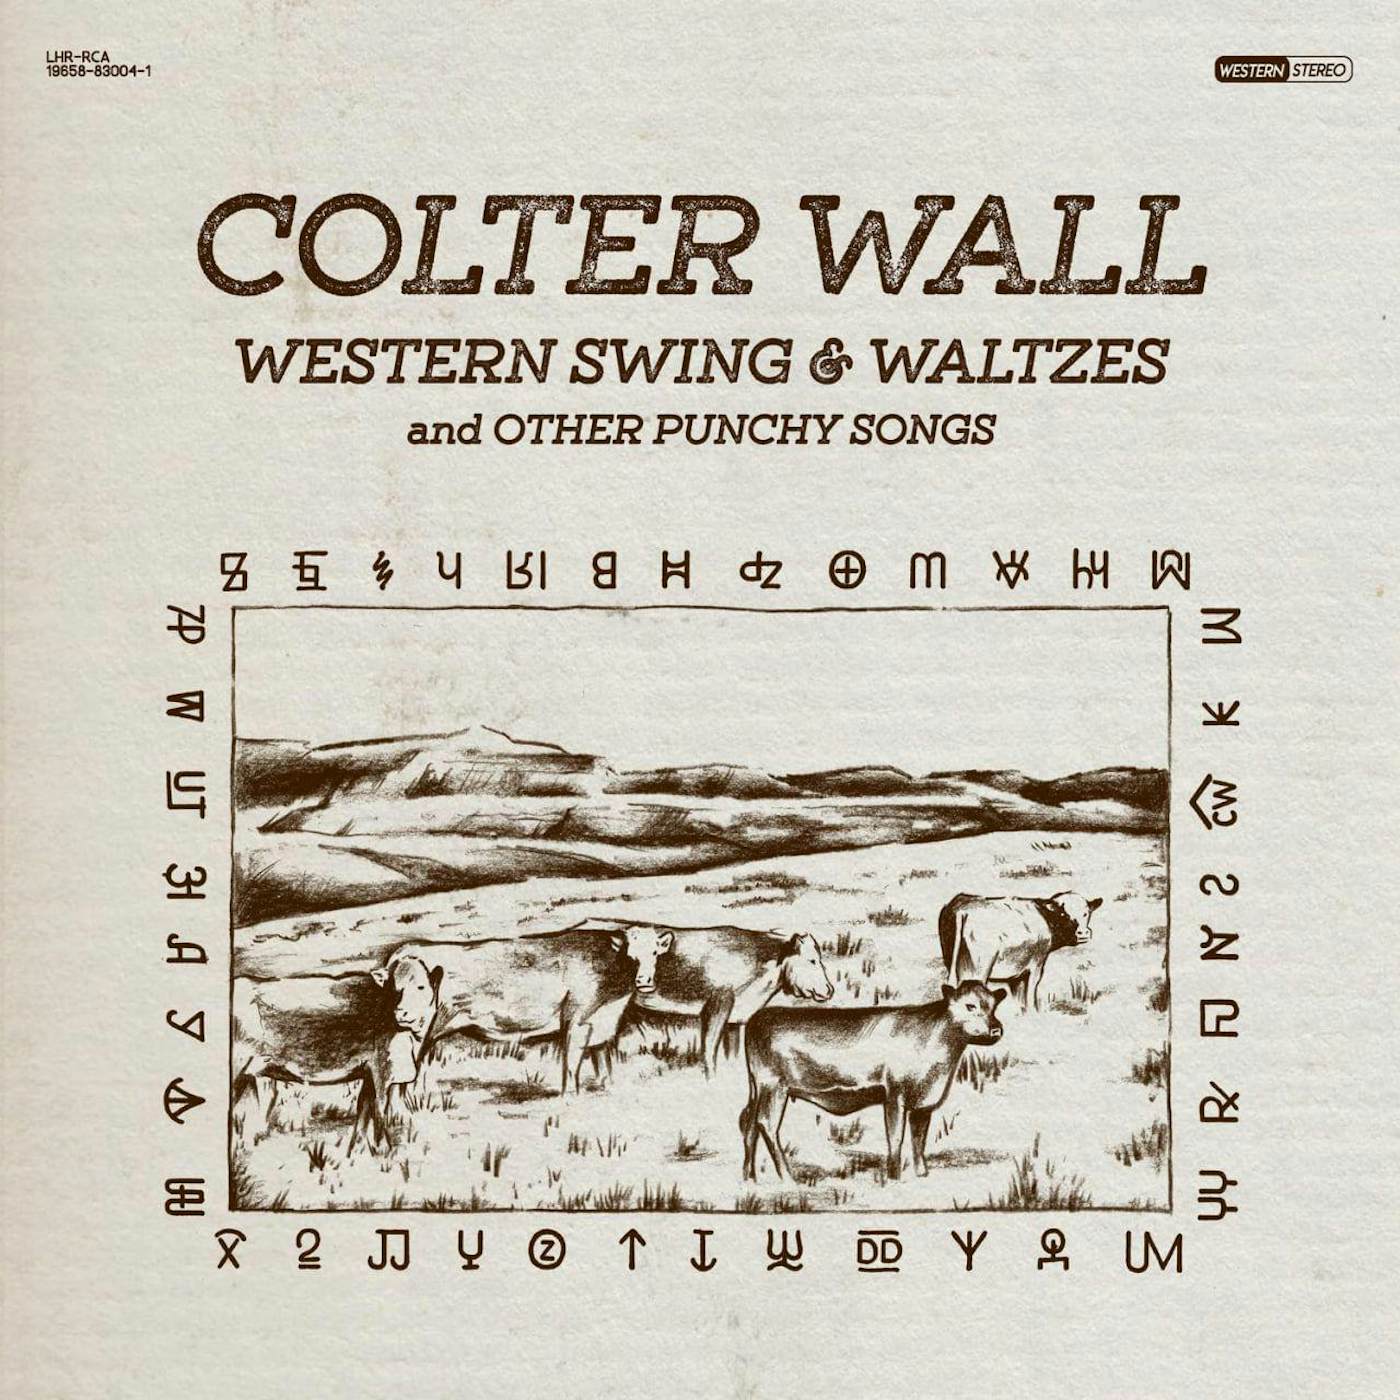 Colter Wall Western Swing & Waltzes and Other Punchy Songs (Red) Vinyl Record